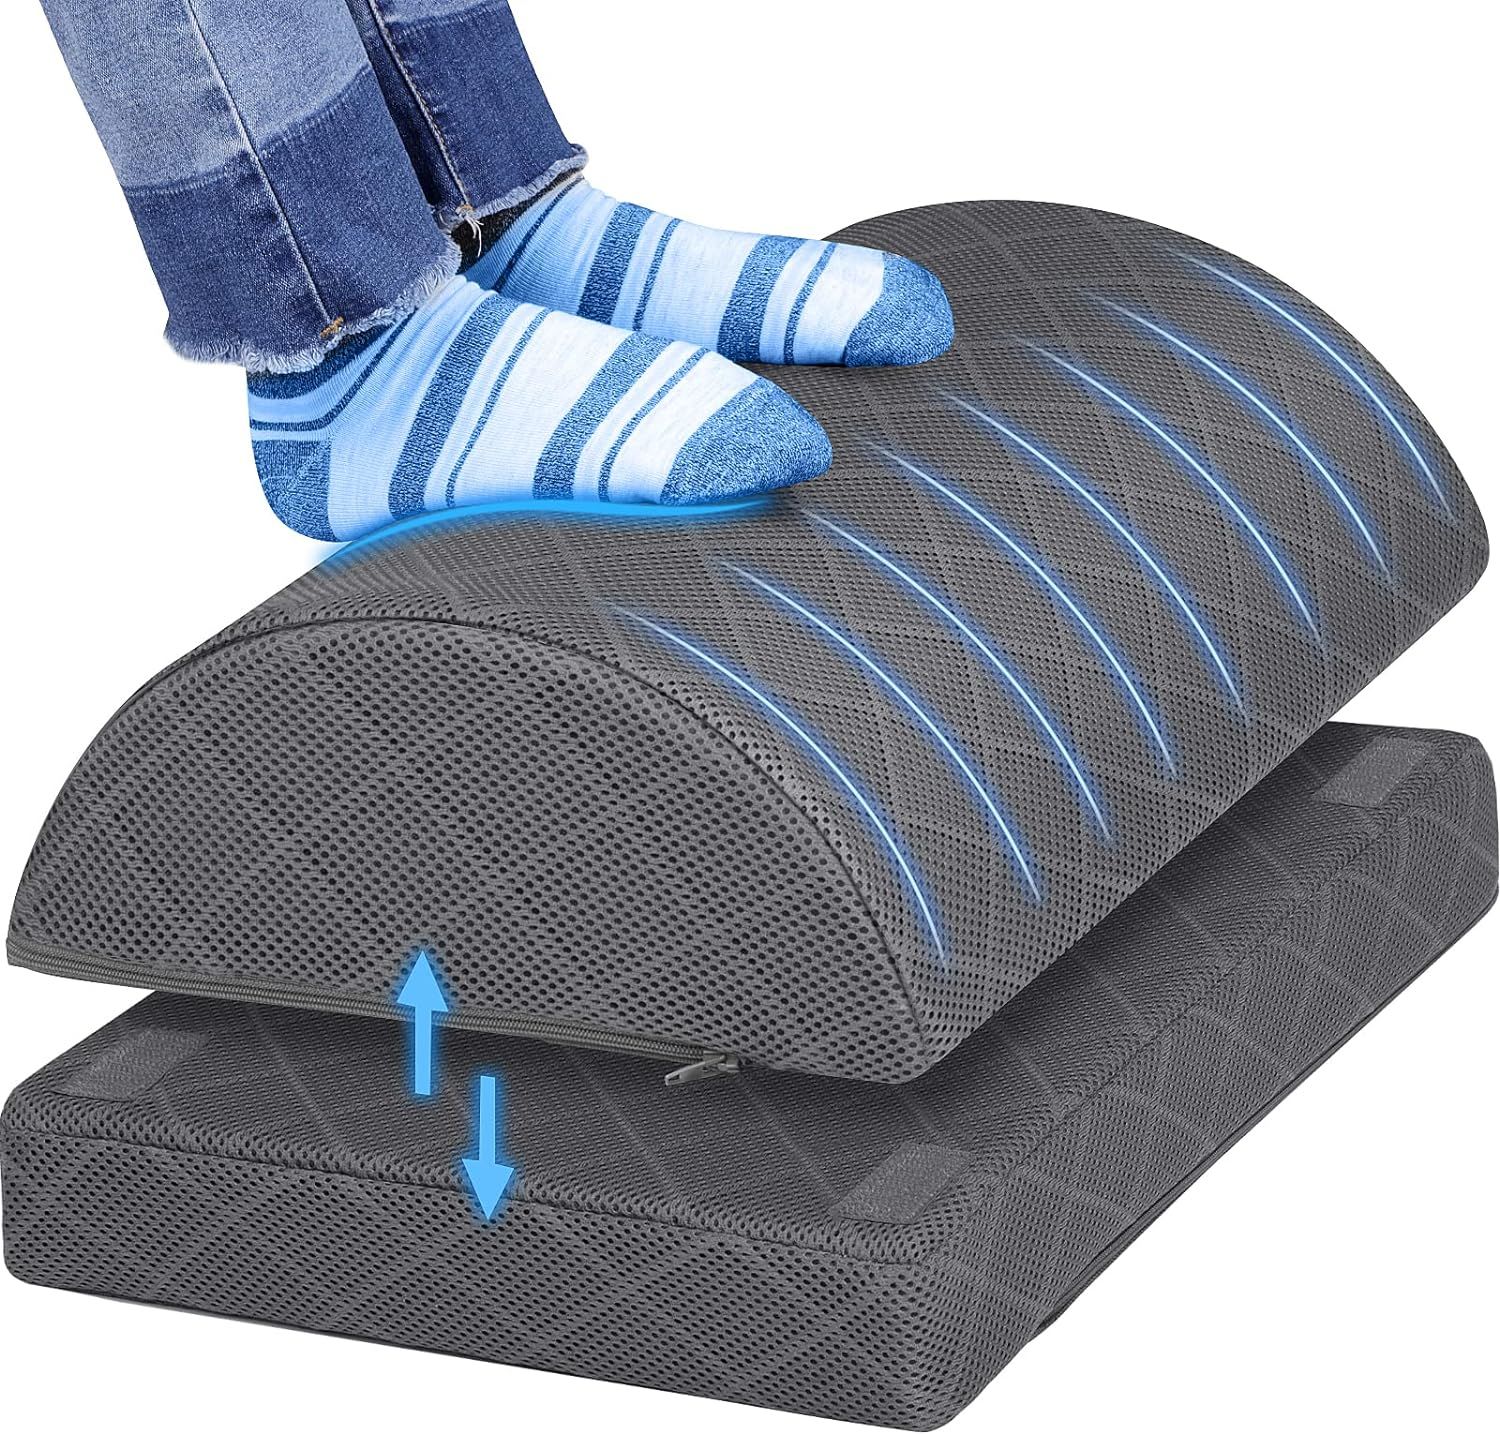 CushZone Foot Rest for Under Desk at Work Adjustable Foam for Office, Work, Gaming, Computer, Gif... | Amazon (US)